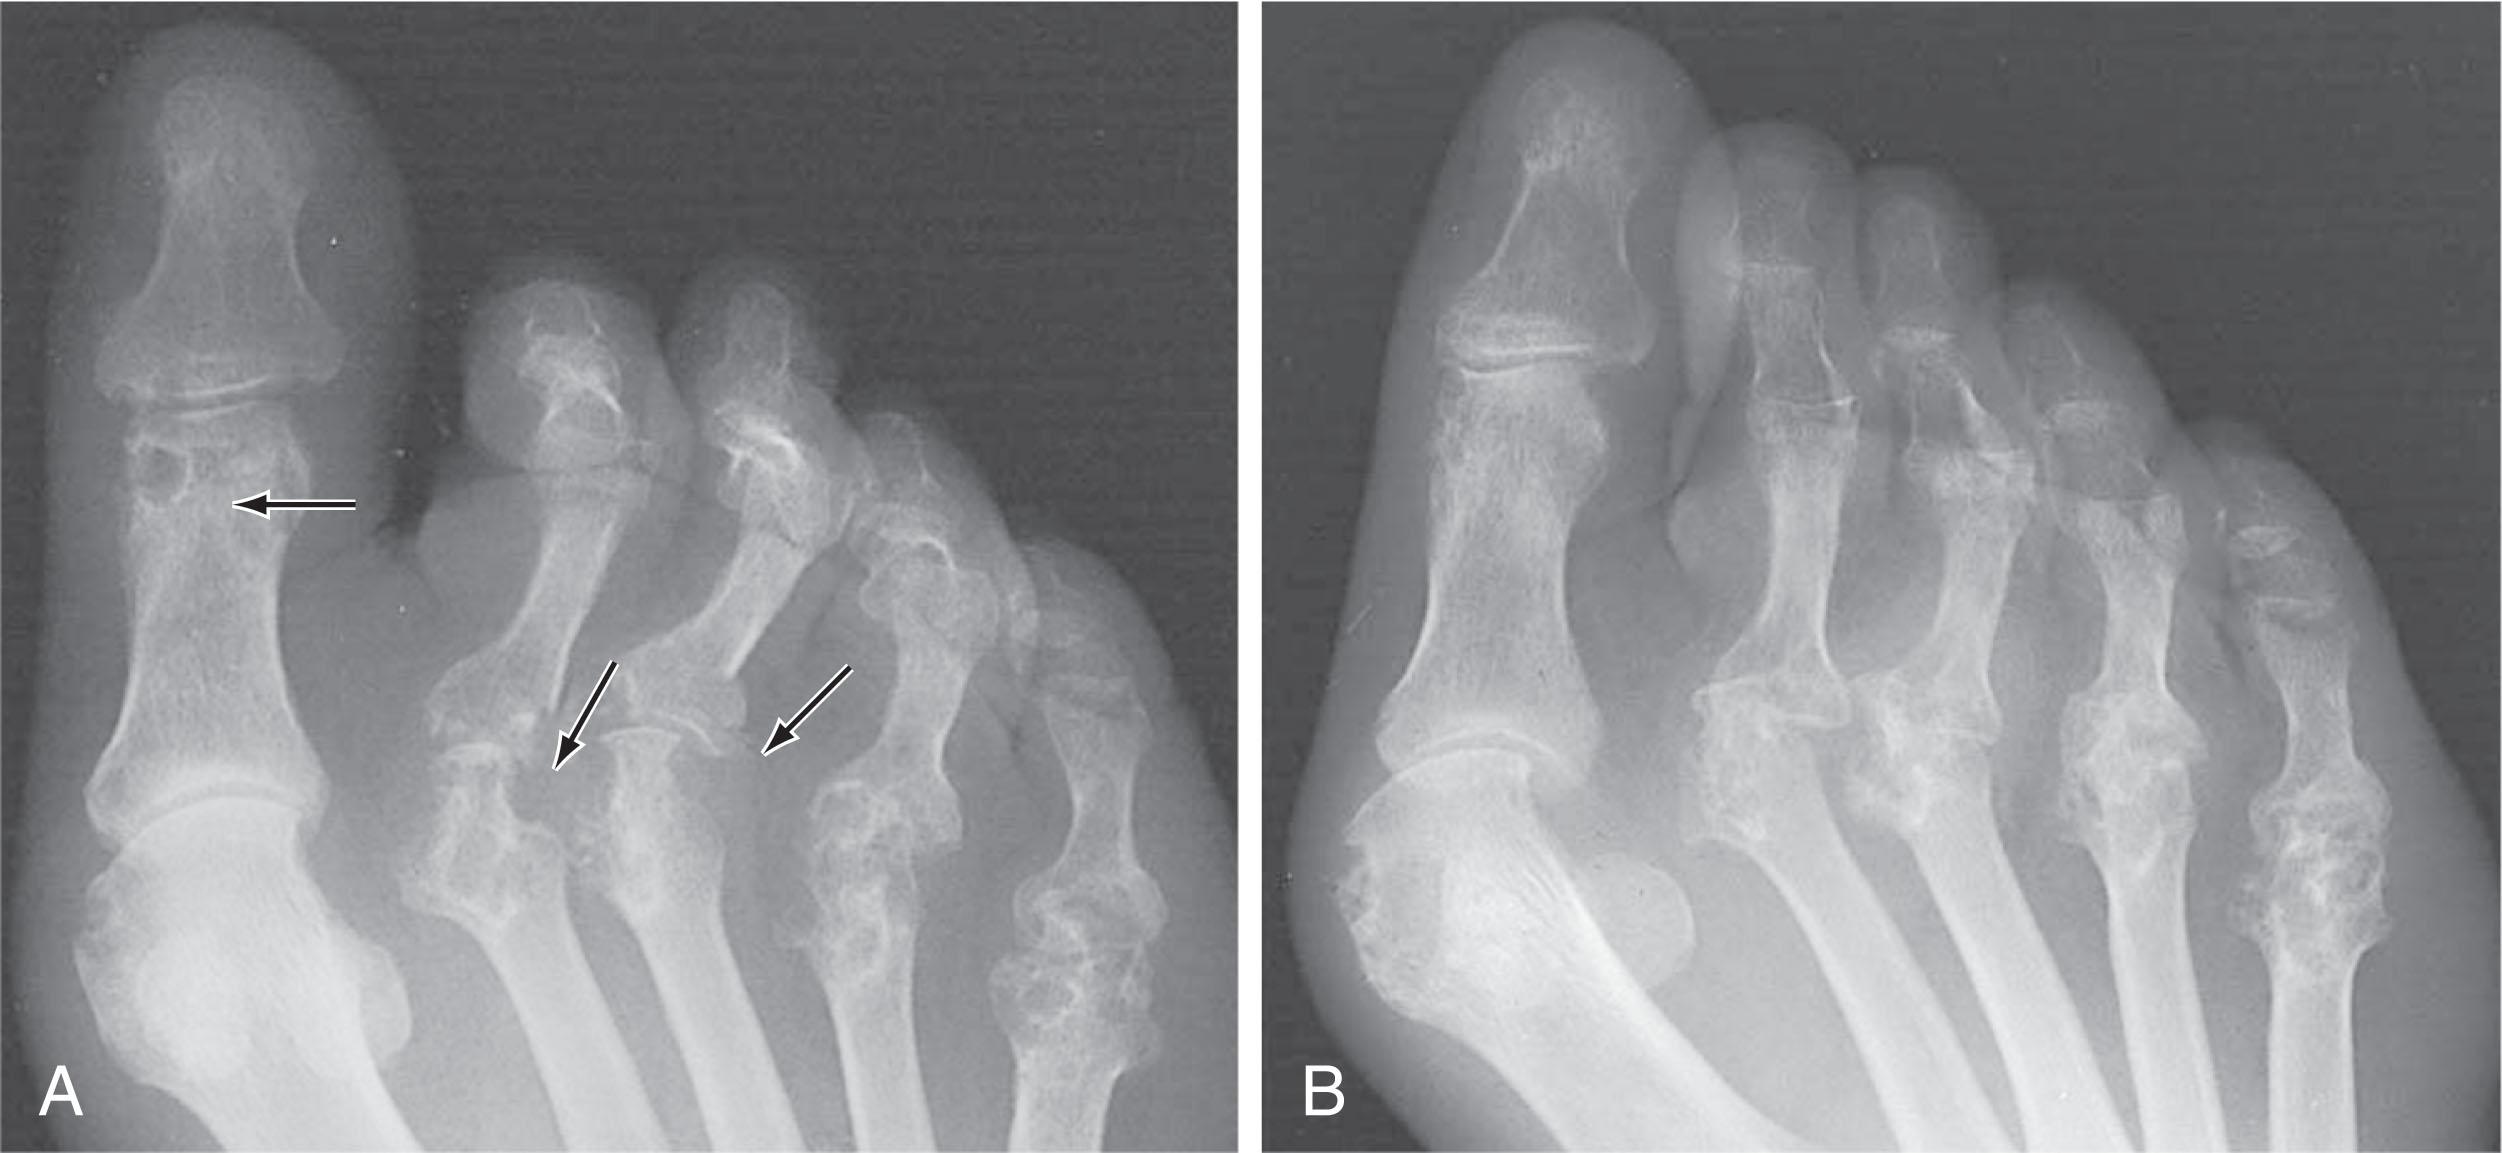 Fig. 21-31, A , Forefoot radiograph demonstrates periarticular erosions of the lesser metatarsal heads. B , Subluxation, dislocation, joint space narrowing, and central erosions of the lesser metatarsophalangeal joints with hallux valgus deformity.